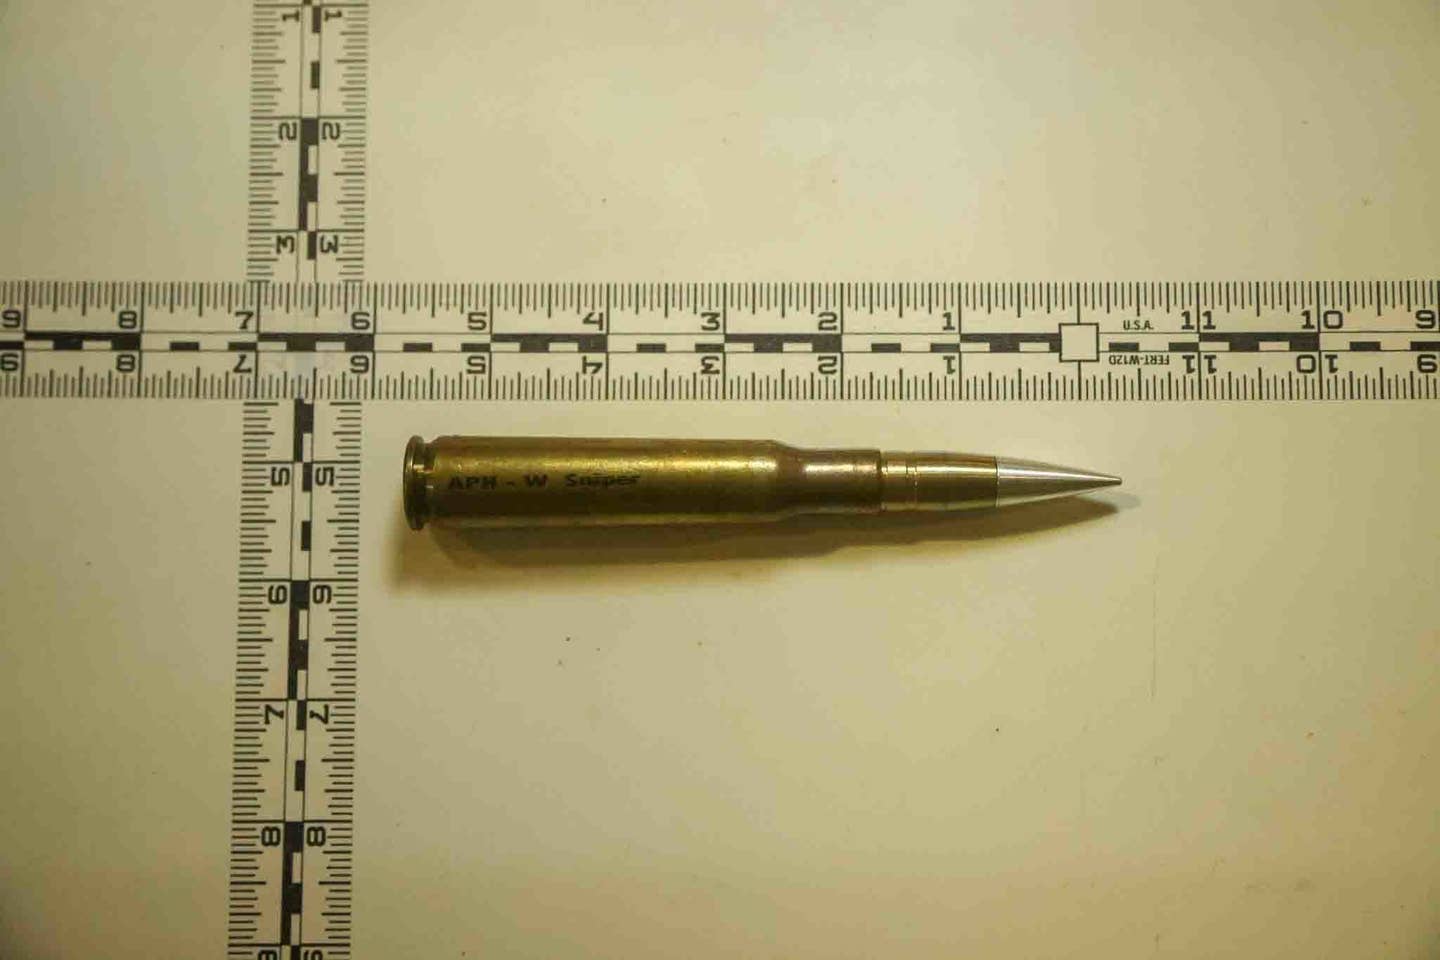 Photo taken Dec. 3, 2022 of an individual round of 12.7mm ammunition seized from a fishing trawler interdicted by Expeditionary Mobile Base USNS<em> Lewis B. "Chesty" Puller</em>, Dec. 1, in the Gulf of Oman. (U.S. Navy photo)